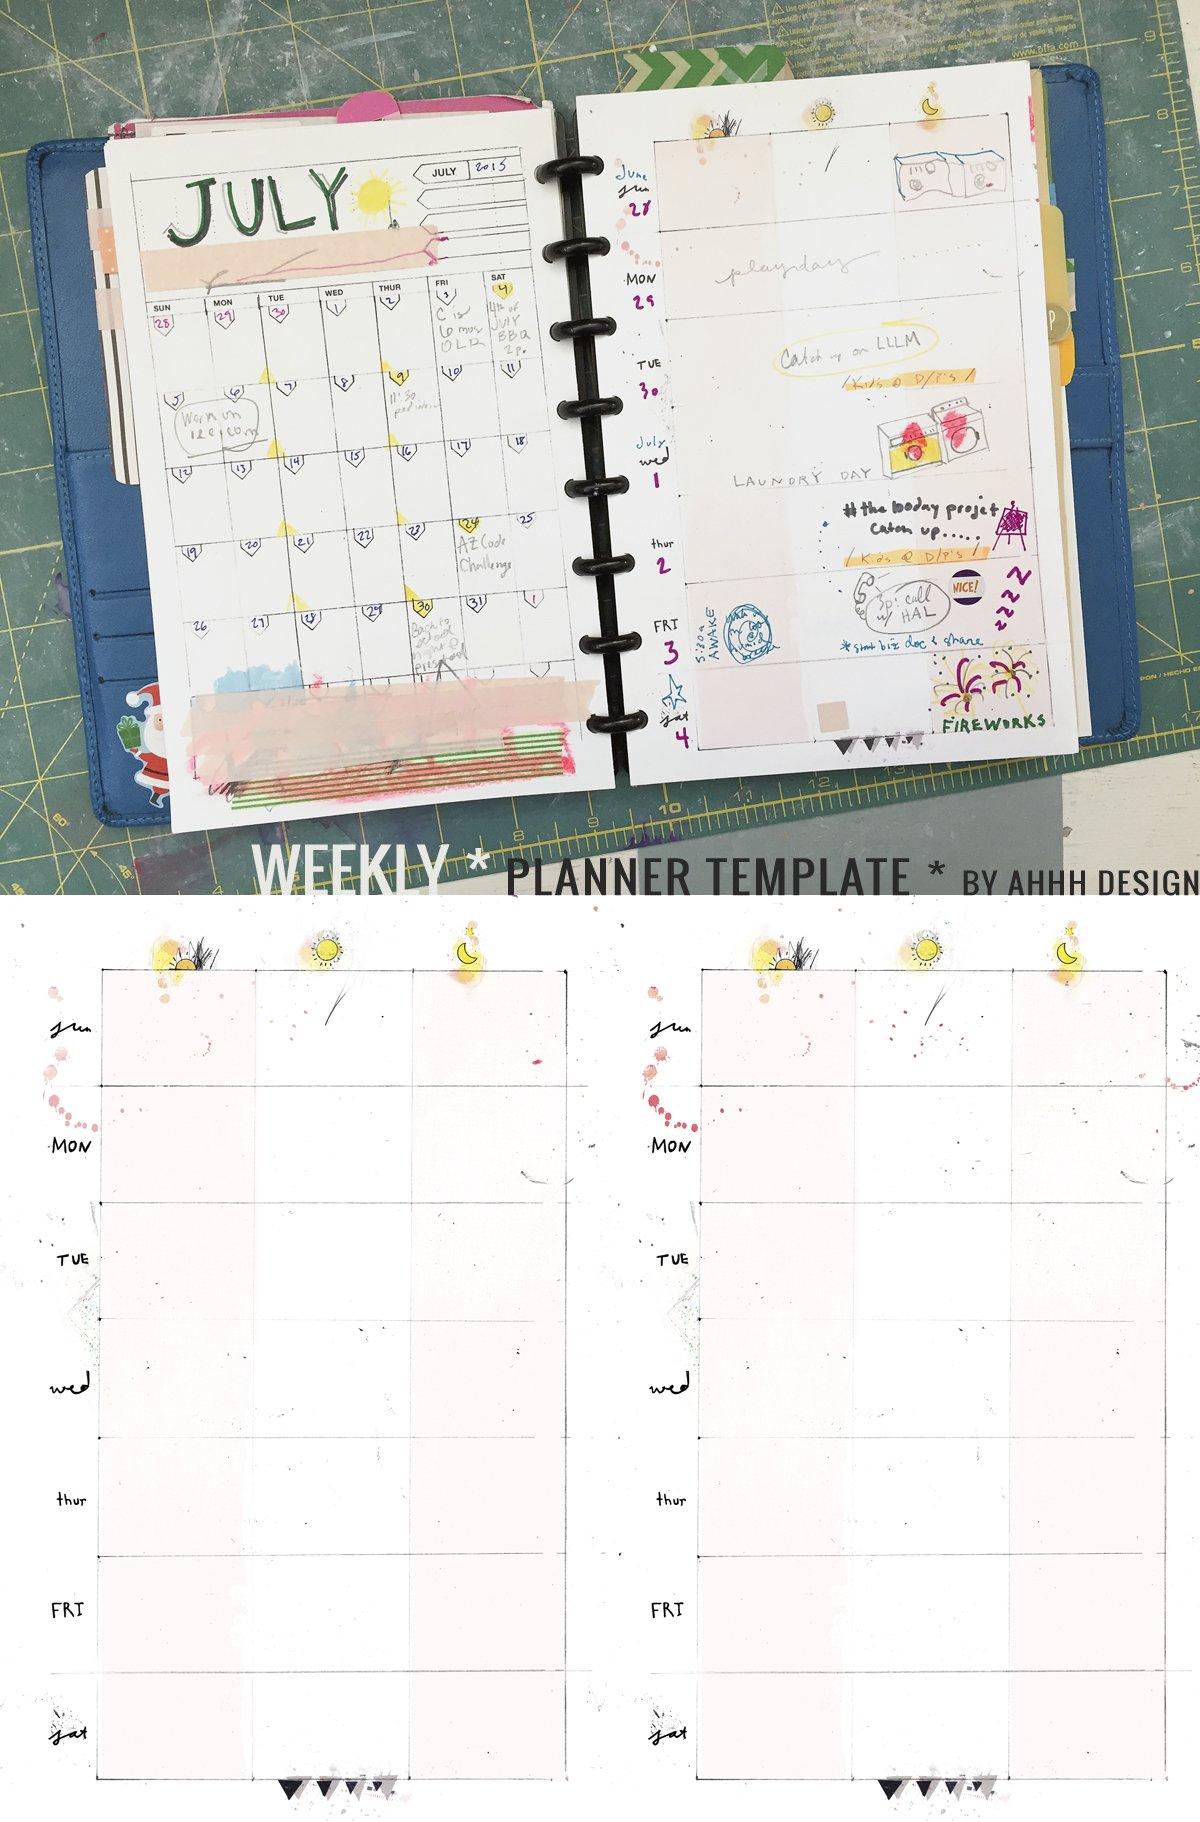 Show Me Monthly Calendars With Agenda Pages That Are 5.5X8.5 :-Free Calendar Template